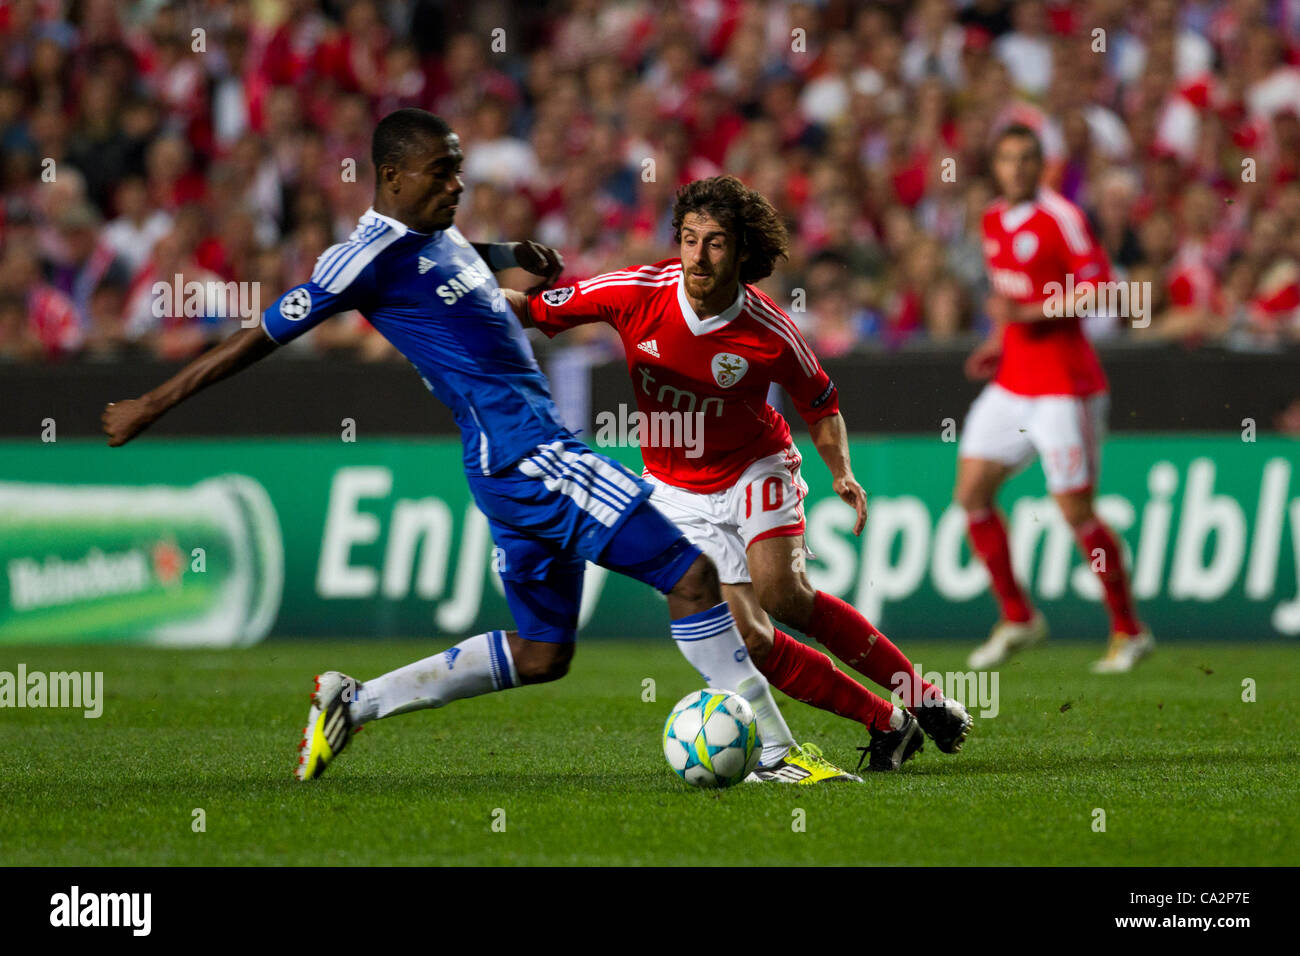 27 March 2012 - Lisbon, Portugal - Salomon Kalou Chelsea FC Forward (L) and  Pablo Aimar SL Benfica Midfielder (R) during the match between Portugal SL  Bebfica and England Chelsea FC for